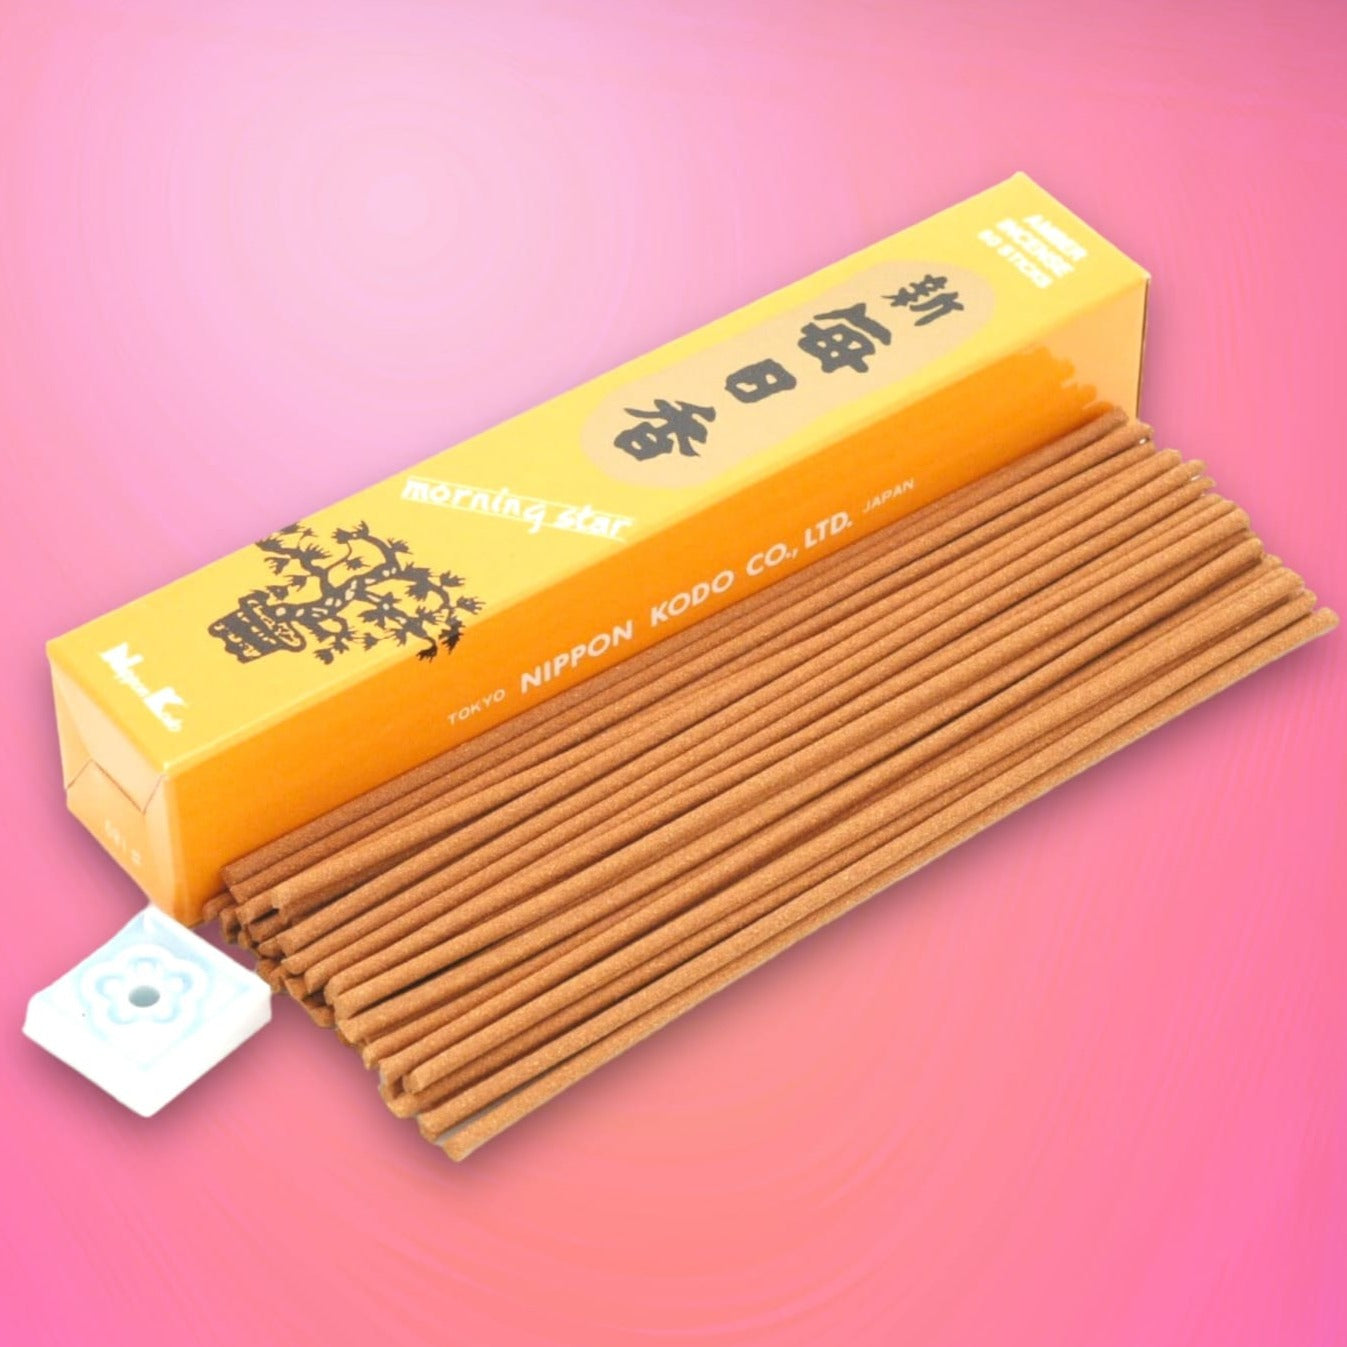 Morning Star Incense 50 Sticks - Amber 0923 - Groupbycolor -